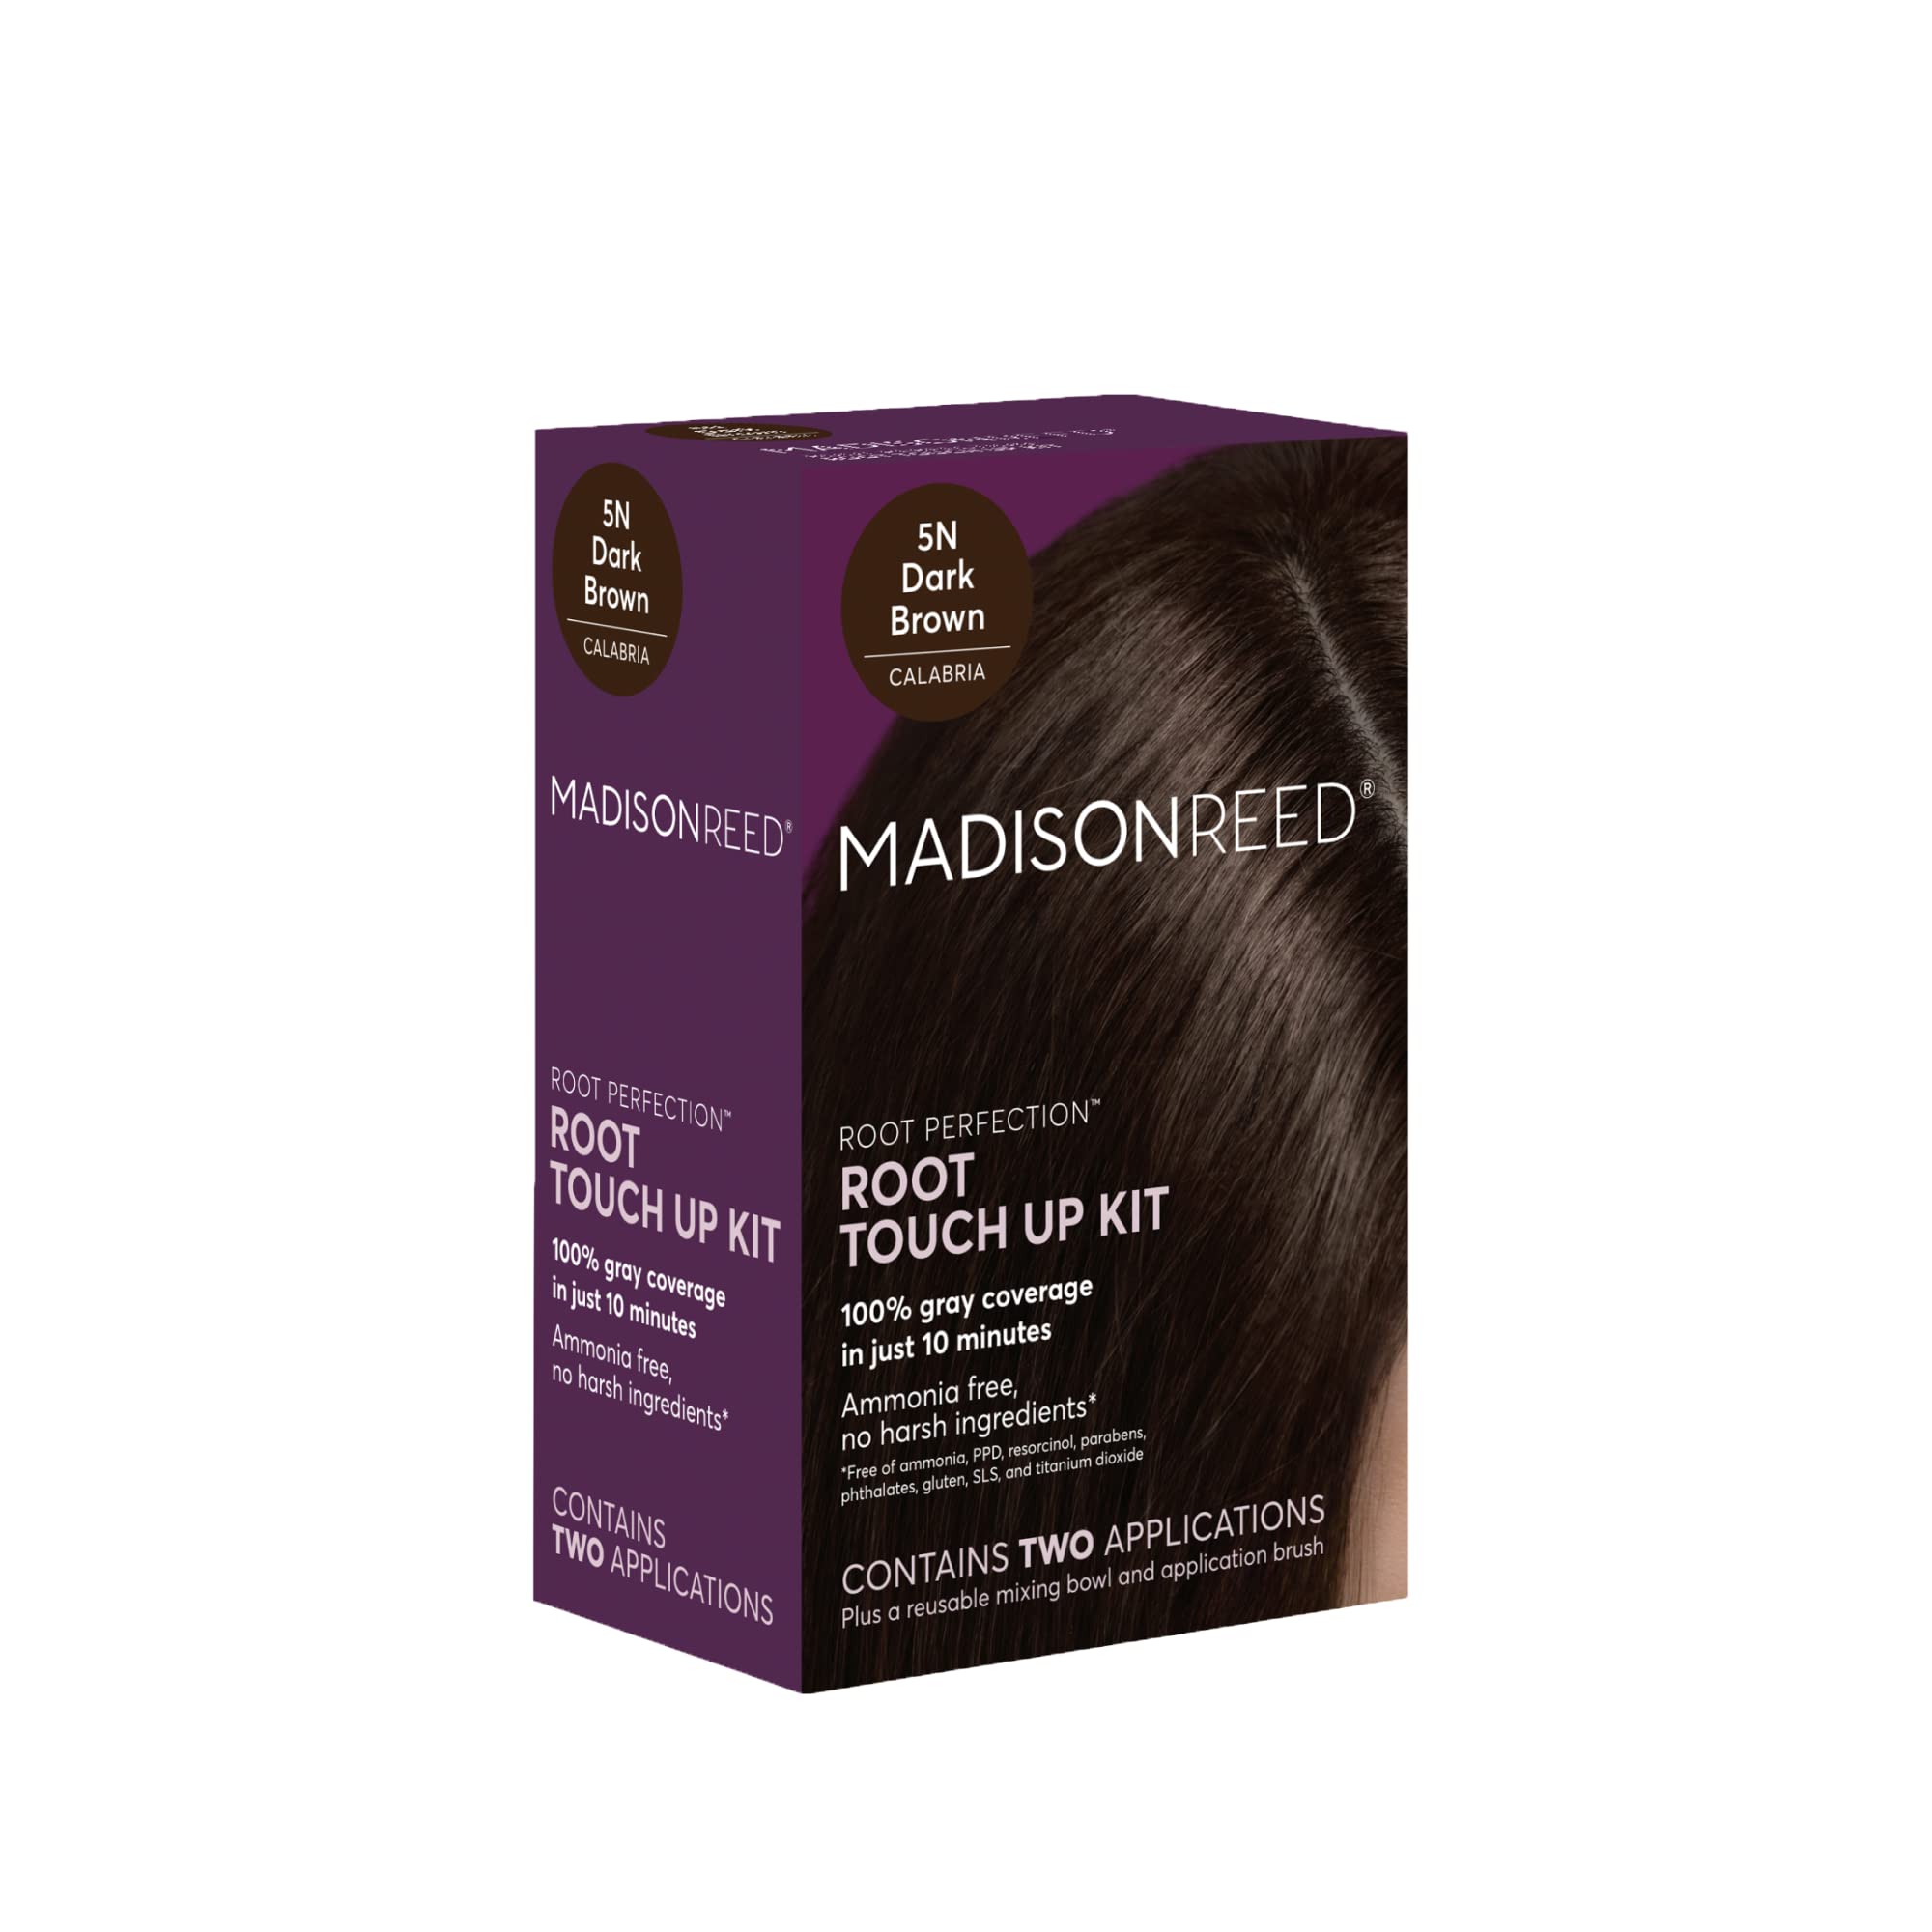 Madison Reed Root Perfection Permanent Root Touch Up